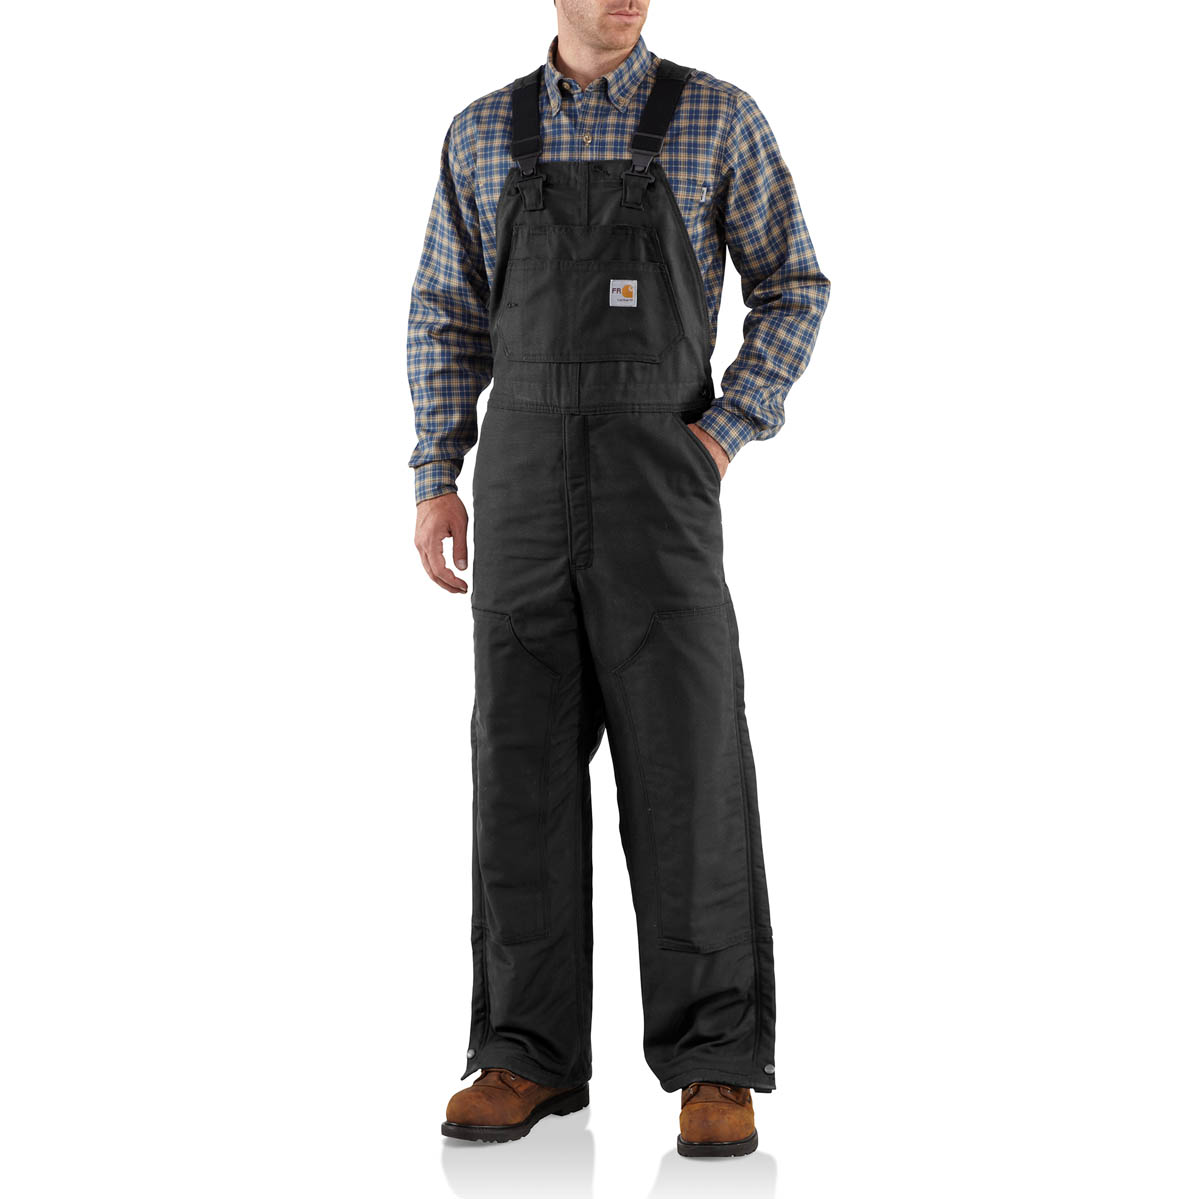 Carhartt Men's Flame Resistant Canvas Bib Lined Overall